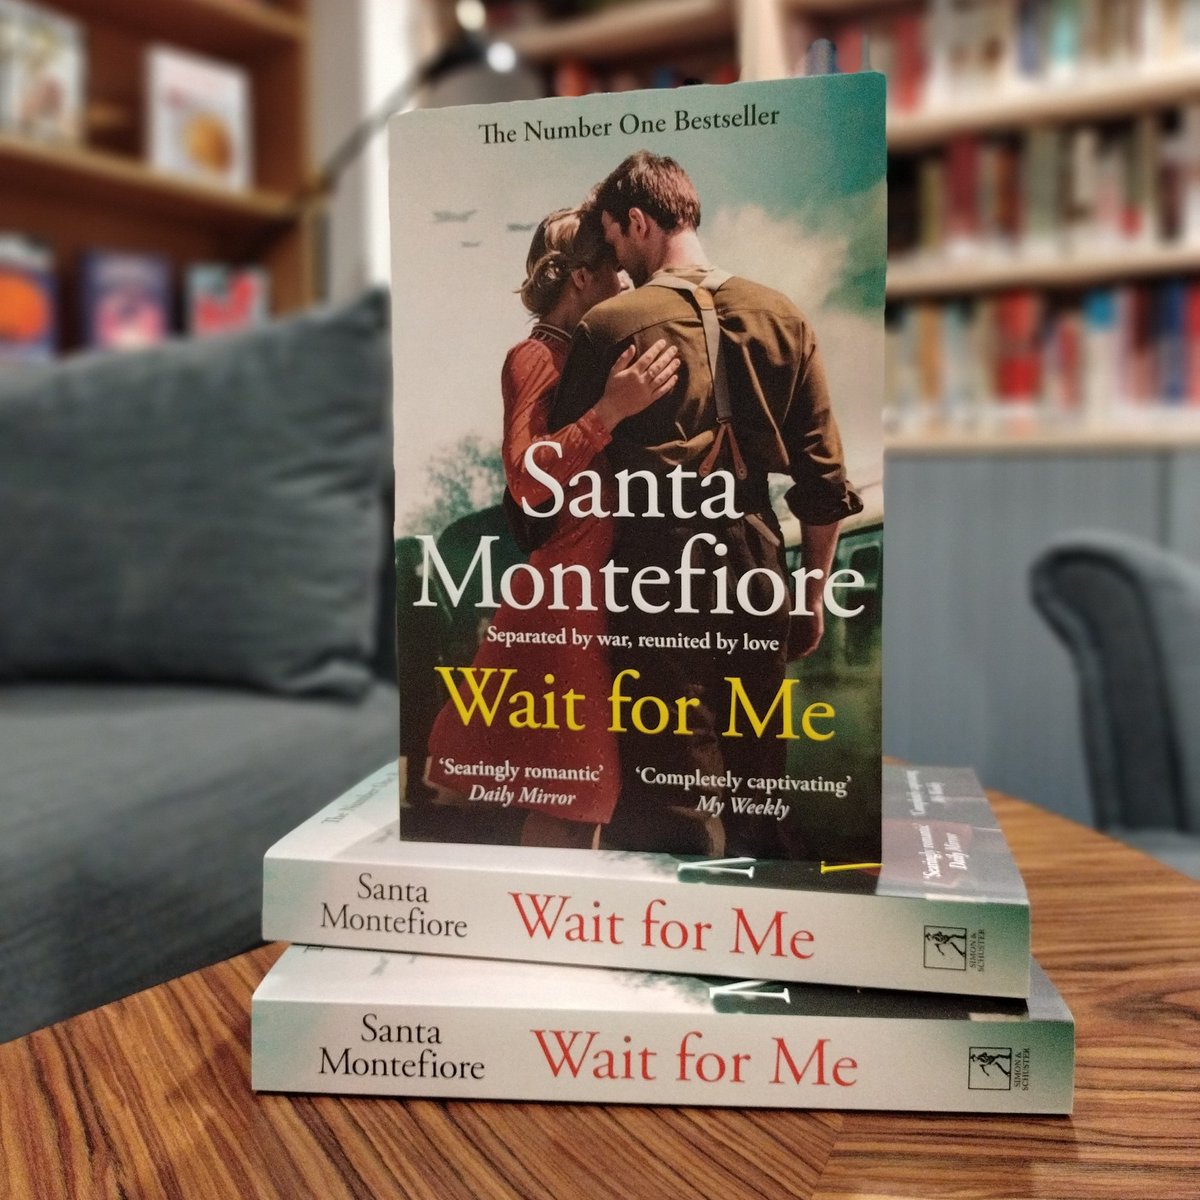 Please join me in wishing @SantaMontefiore a HUGE happy publication day hurrah for the STUNNING paperback edition of #WaitForMe, out TODAY in all good #ChooseBookshops, @Morrisons @asda @sainsburys @Waterstones and @WHSmith! simonandschuster.co.uk/books/Wait-for…